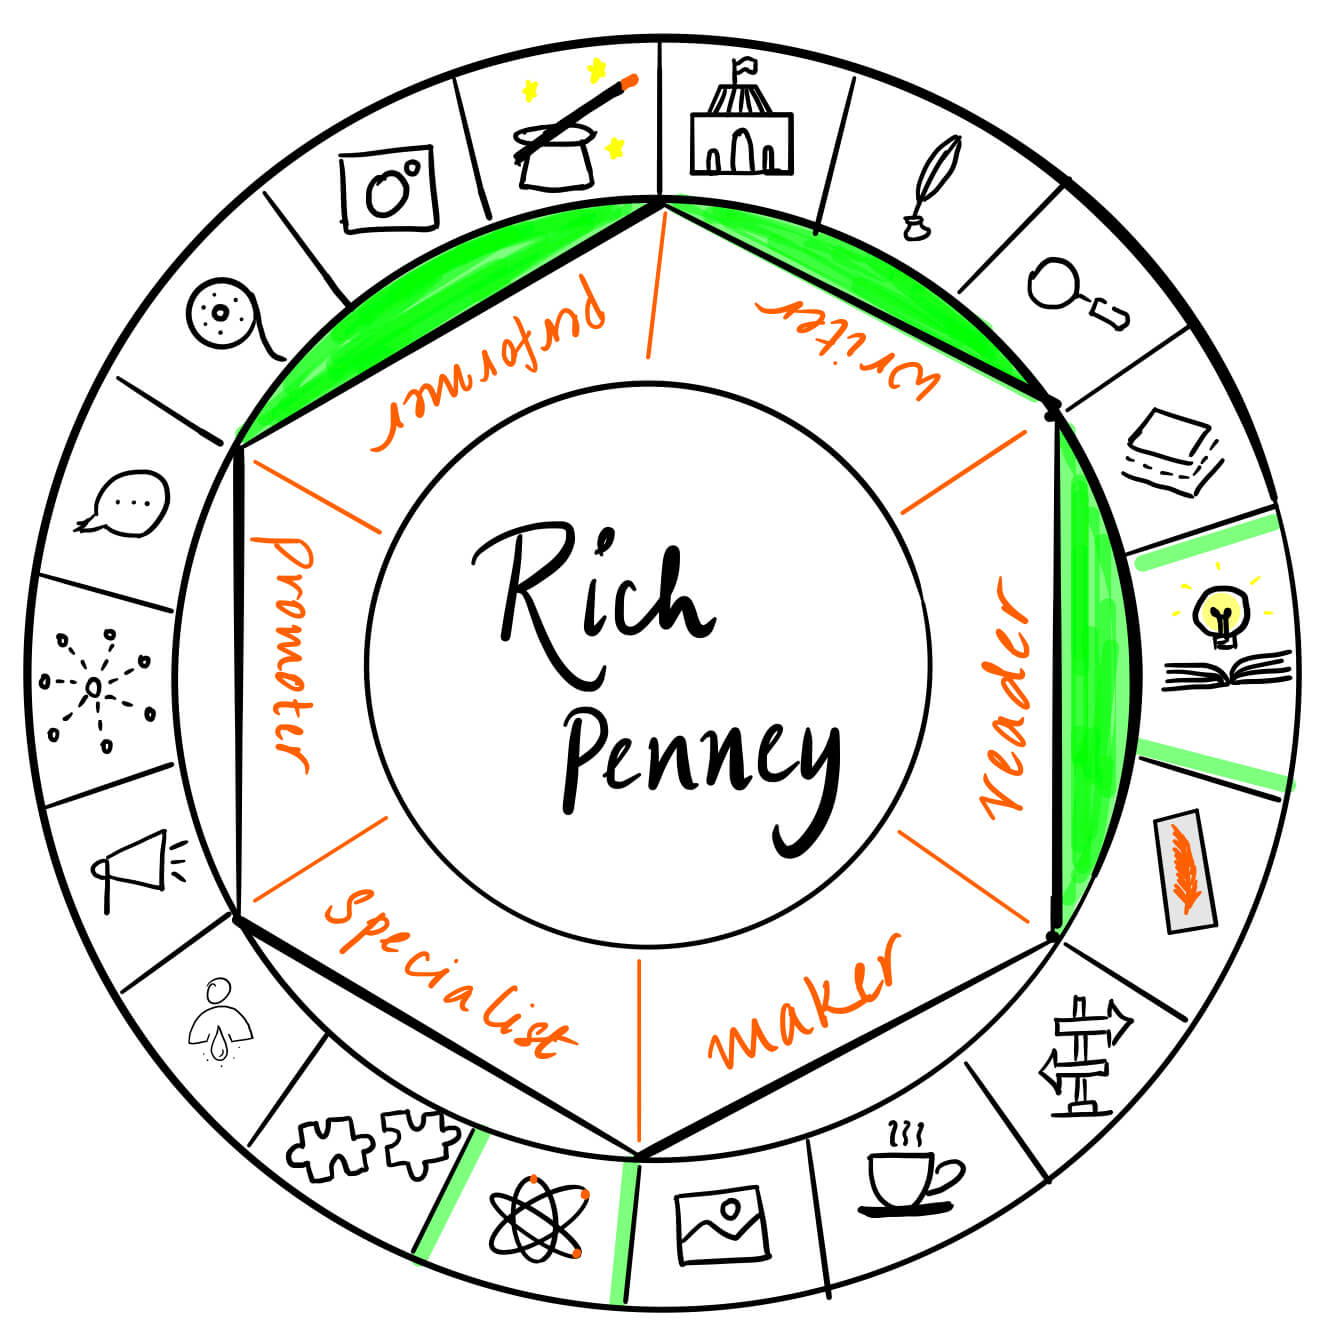 Rich Penney is a performer, writer and reader. It's a pleasure to have him over for a guest post on The Creator's Roulette to talk about writing good action scenes - part 2 clarity.